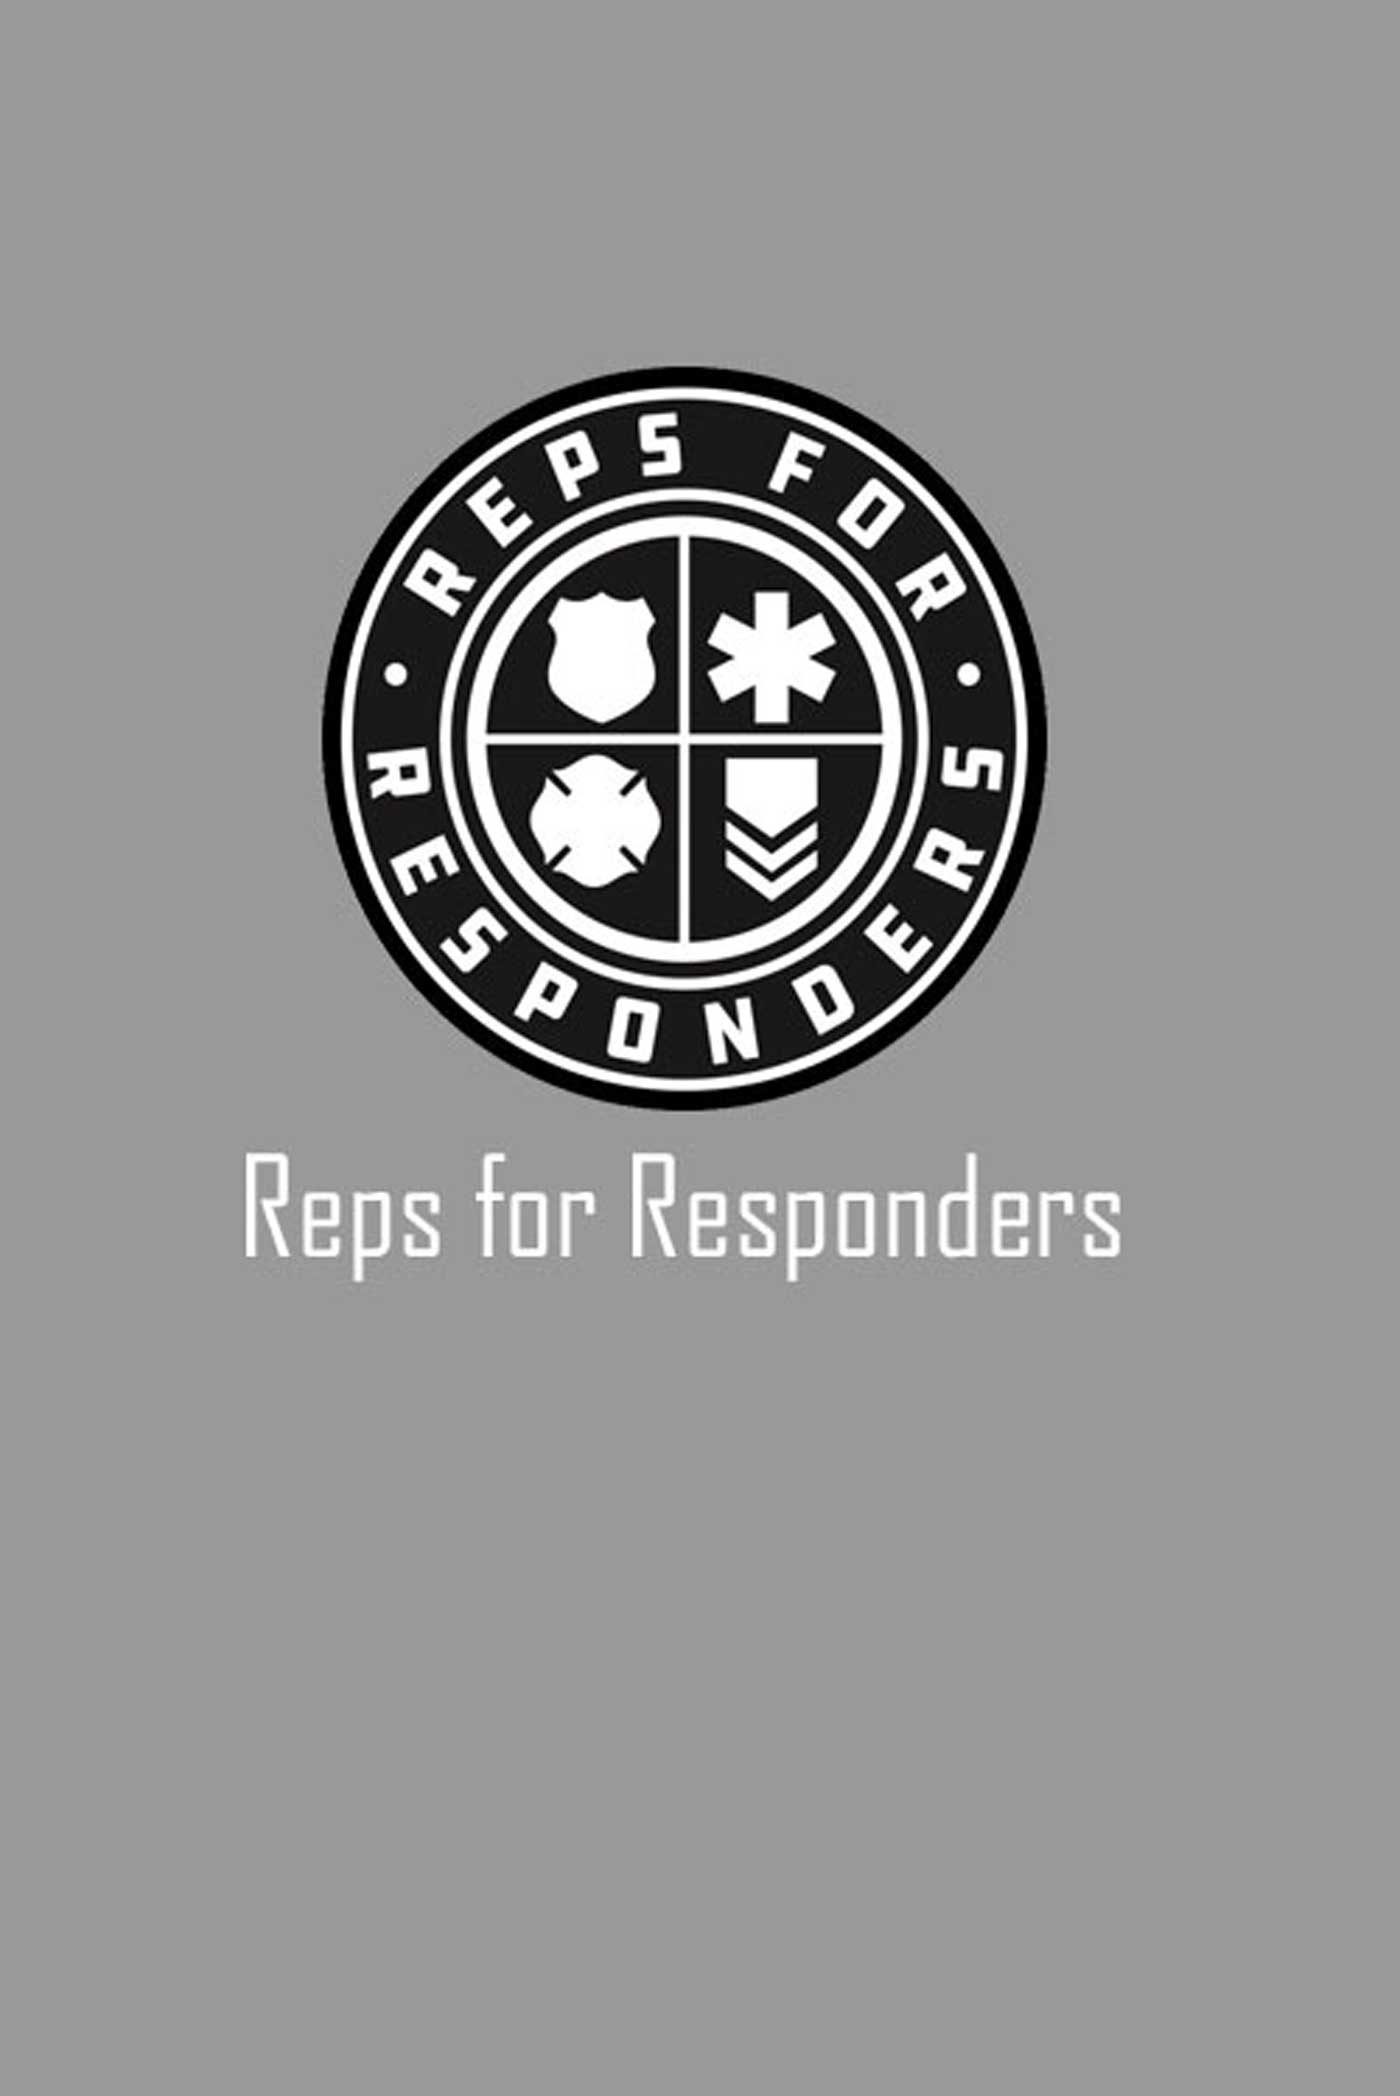 The Reps for Responders logo overlays on a gray background.